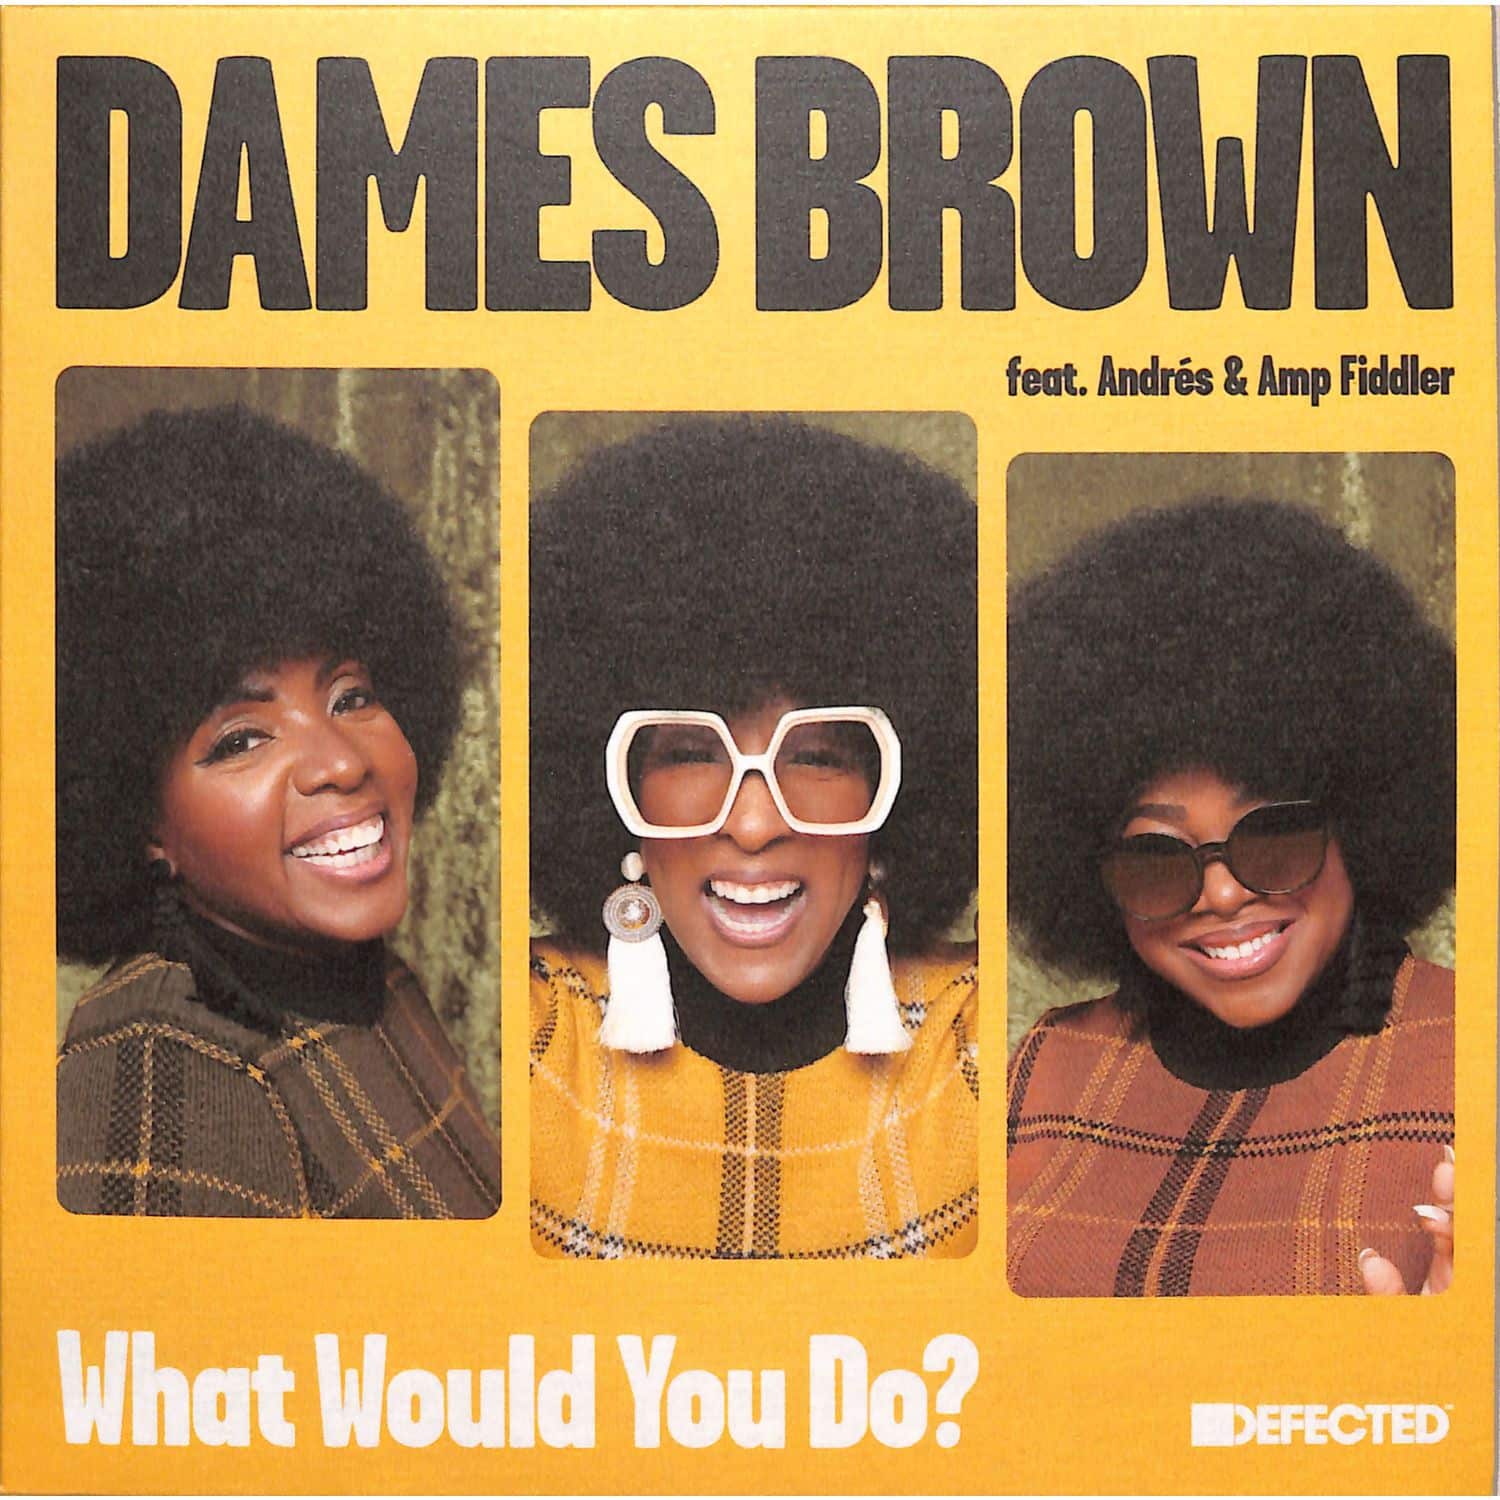 Dames Brown Featuring Andres & Amp Fiddler - WHAT WOULD YOU DO ? 